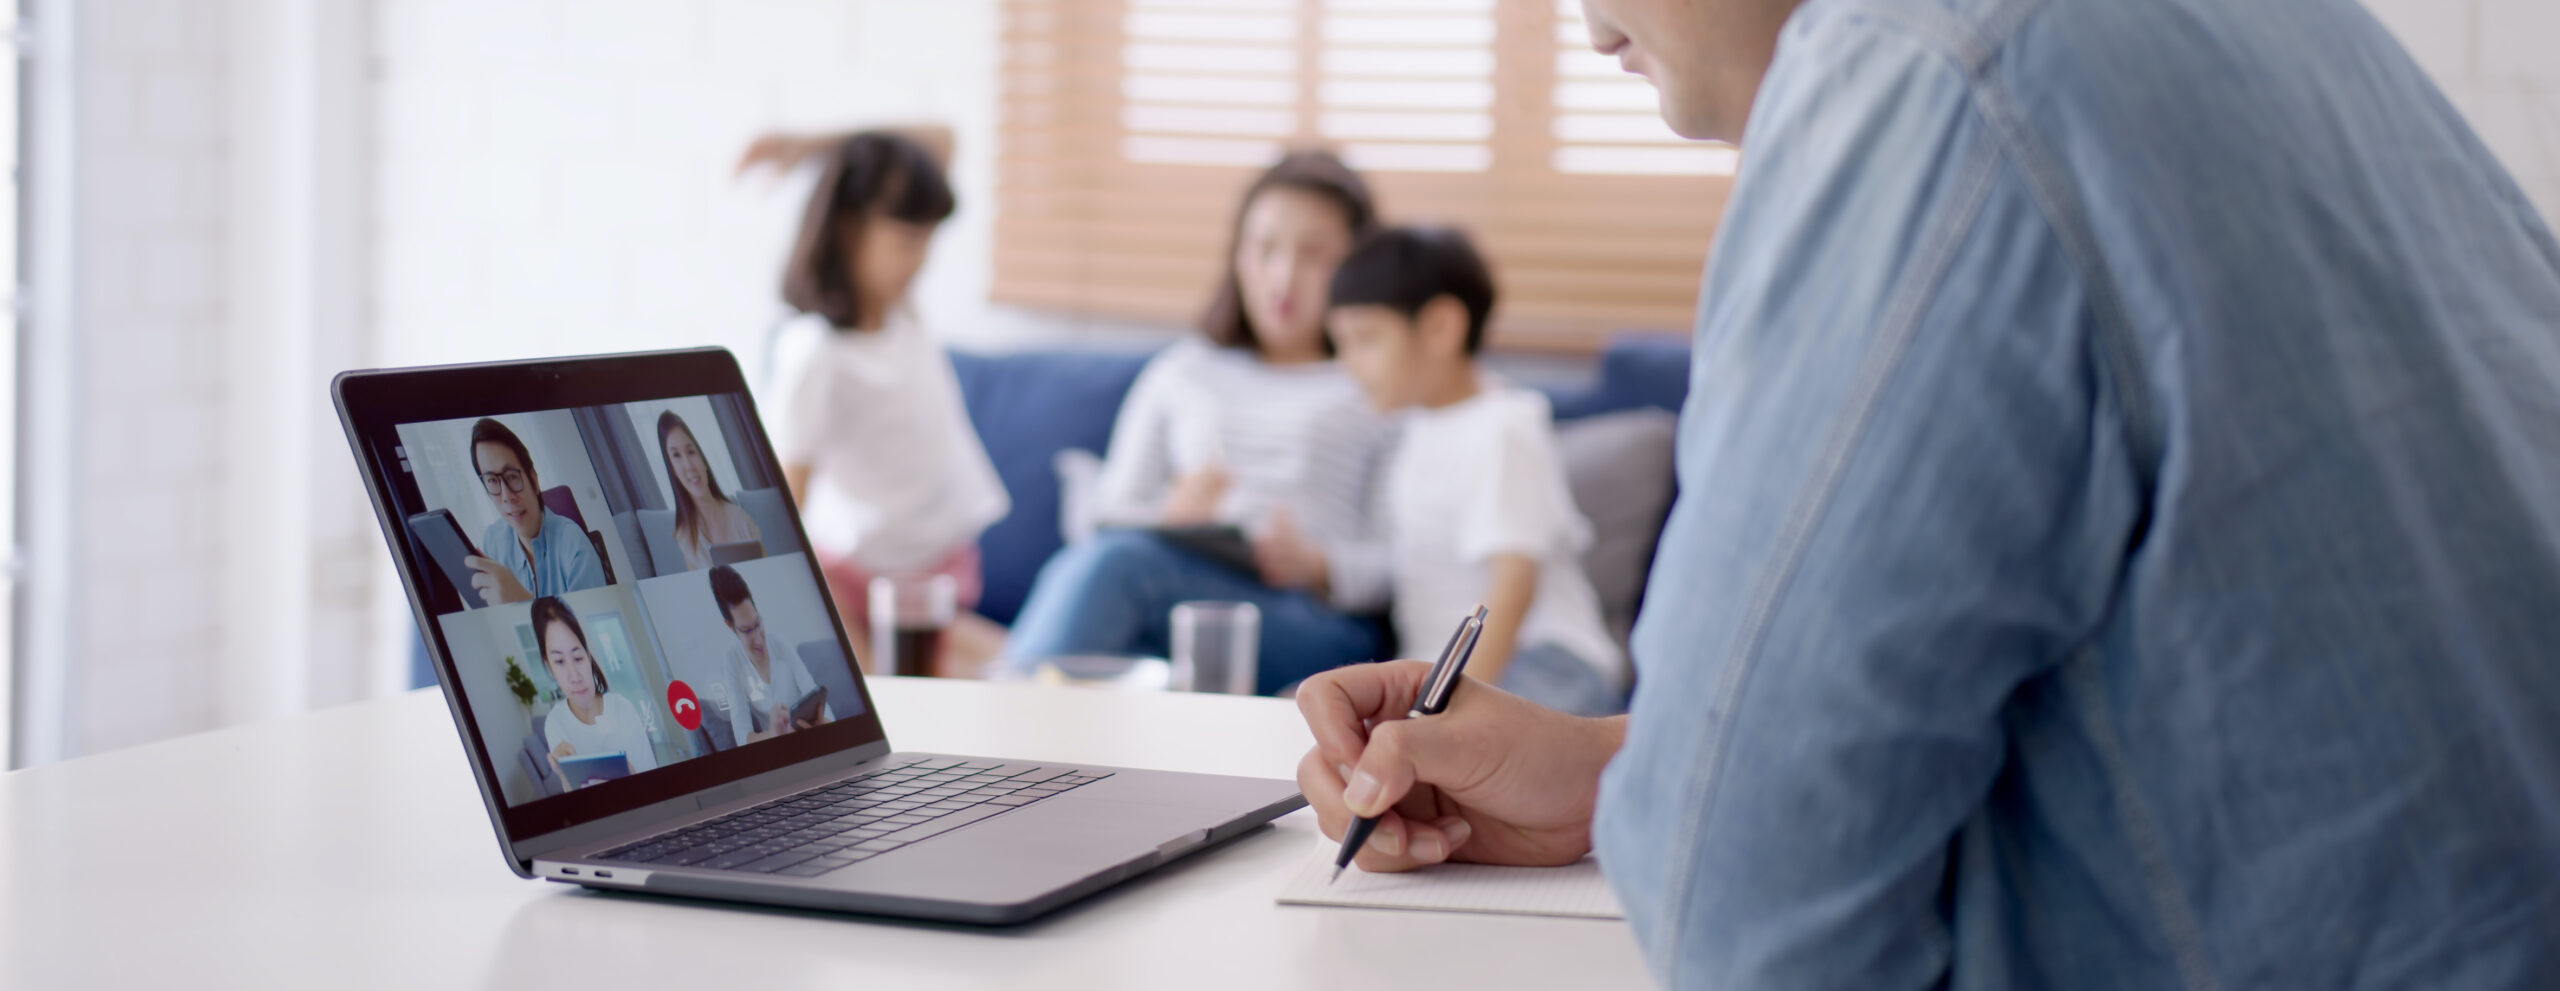 Virtual meetings are better for the environment than in-person meetings